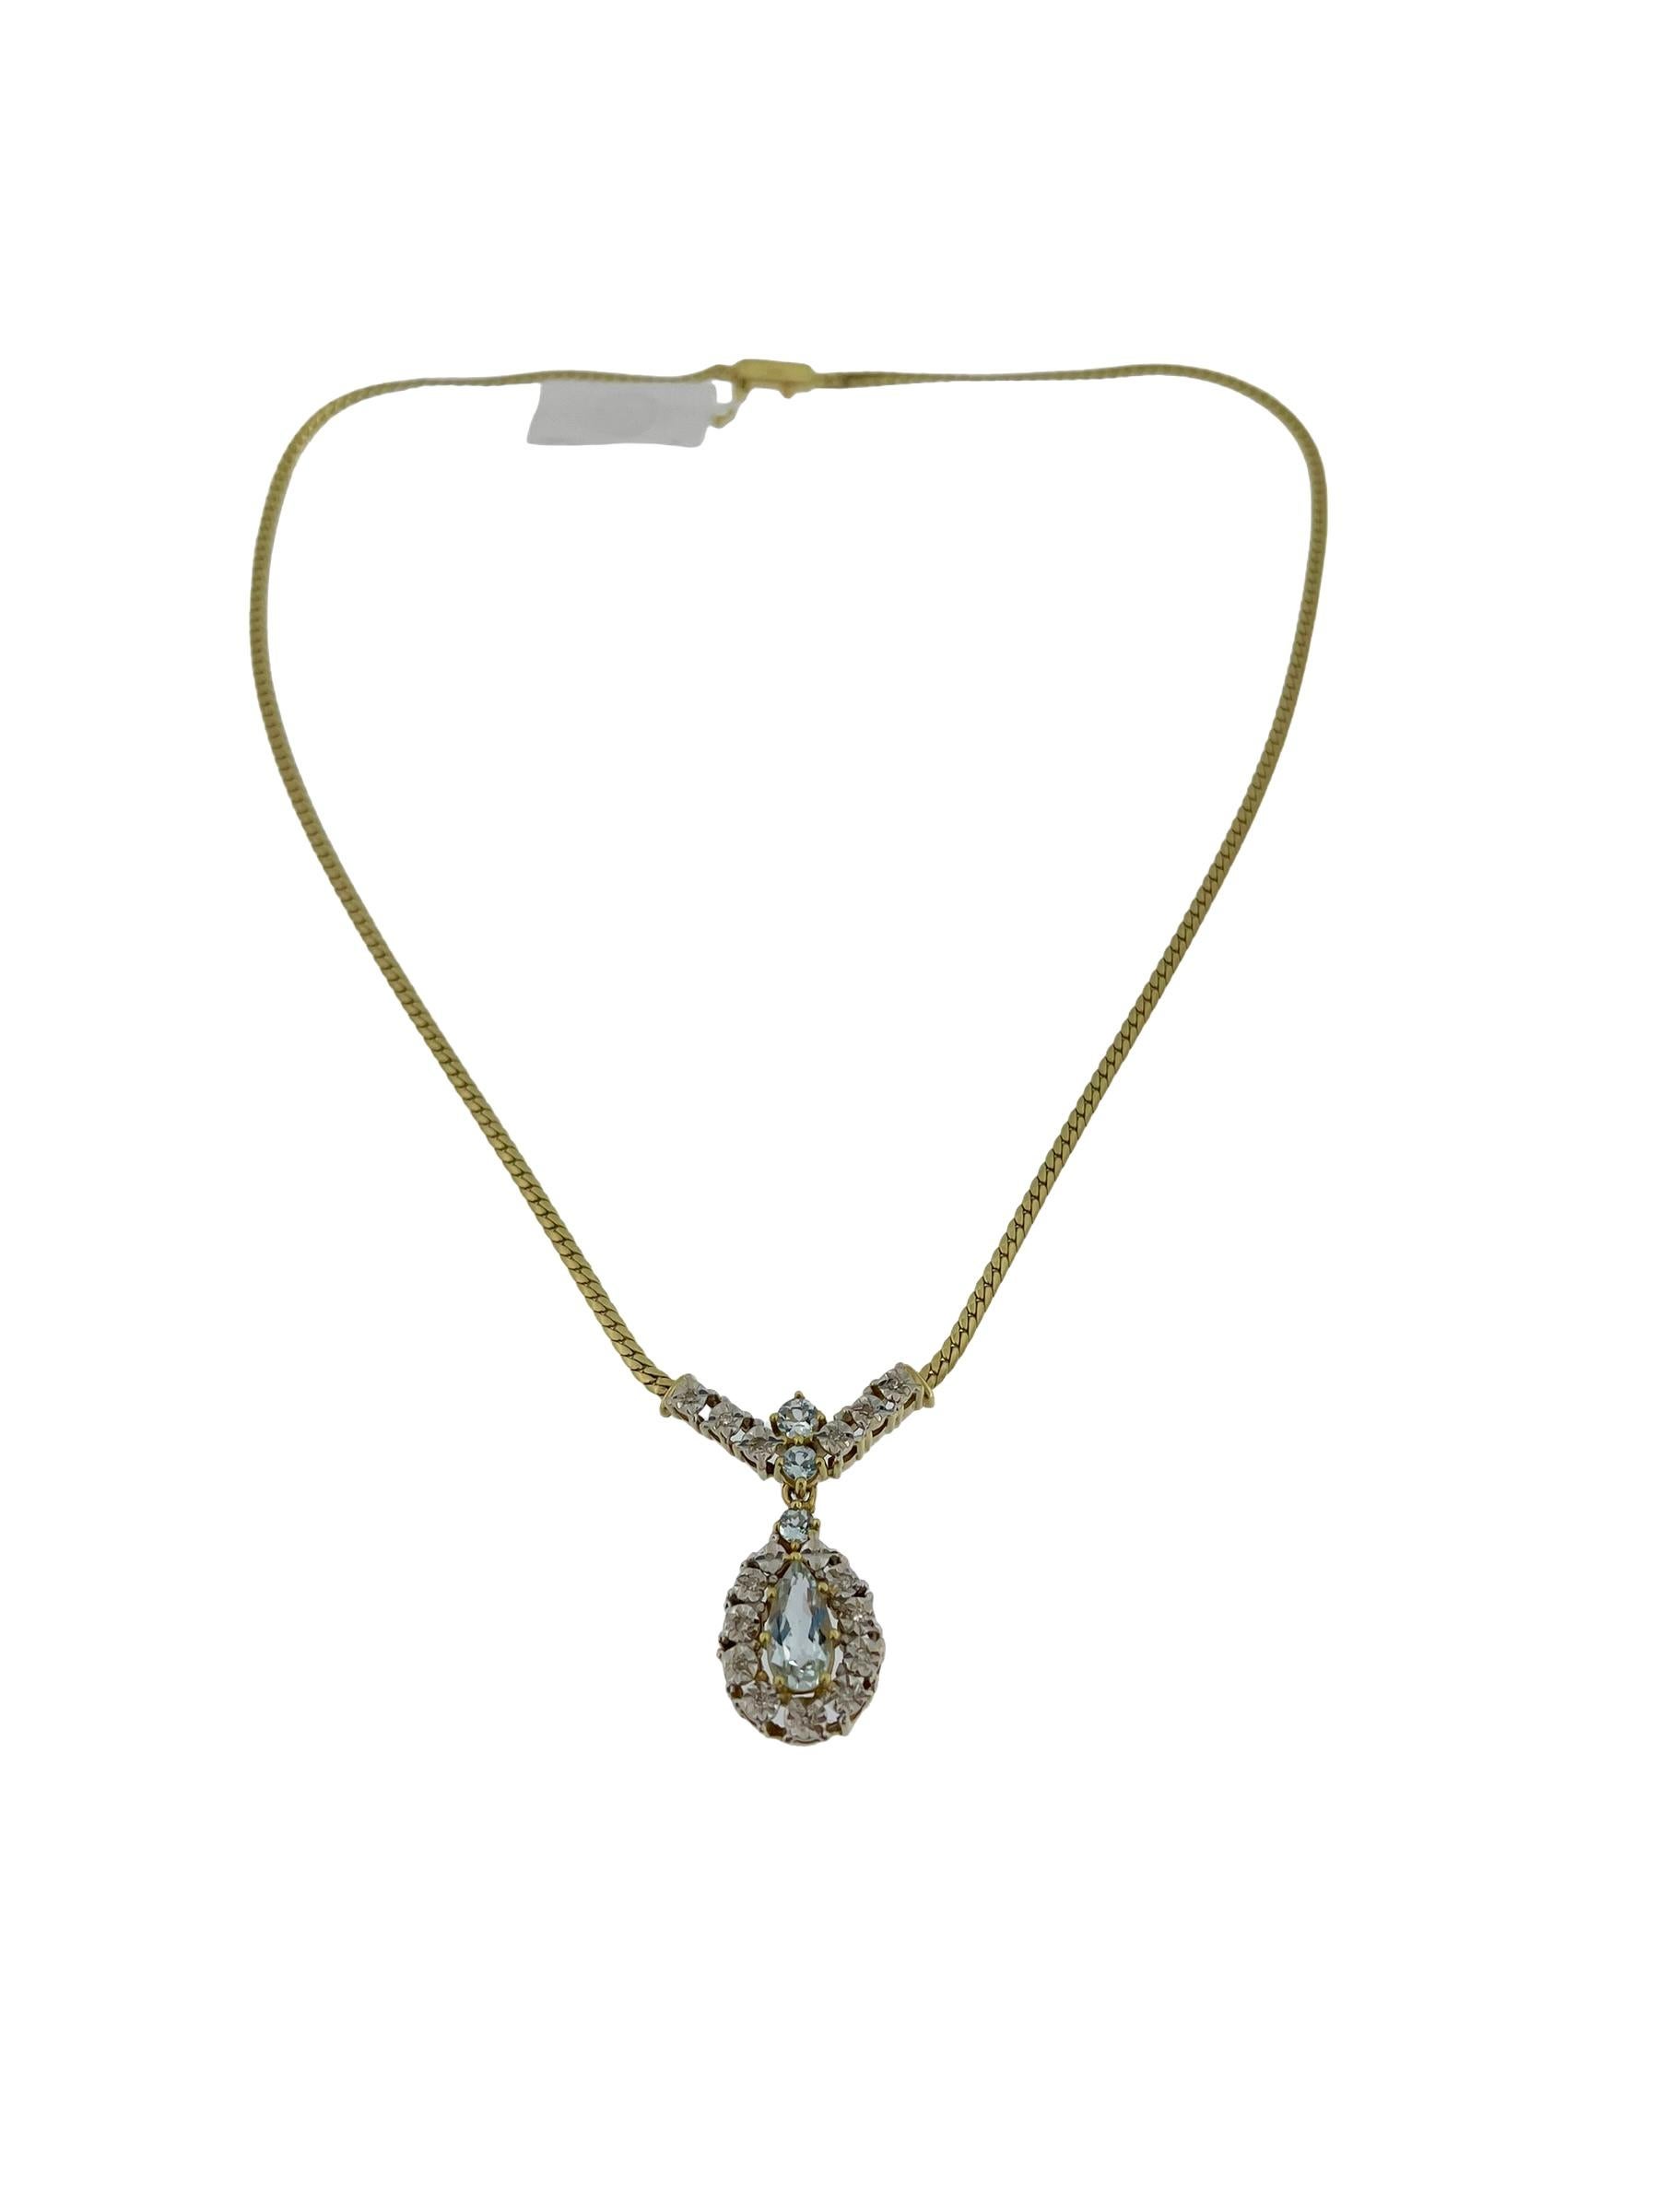 Retro IGI Certified Gold Necklace with Diamonds and Aquamarines For Sale